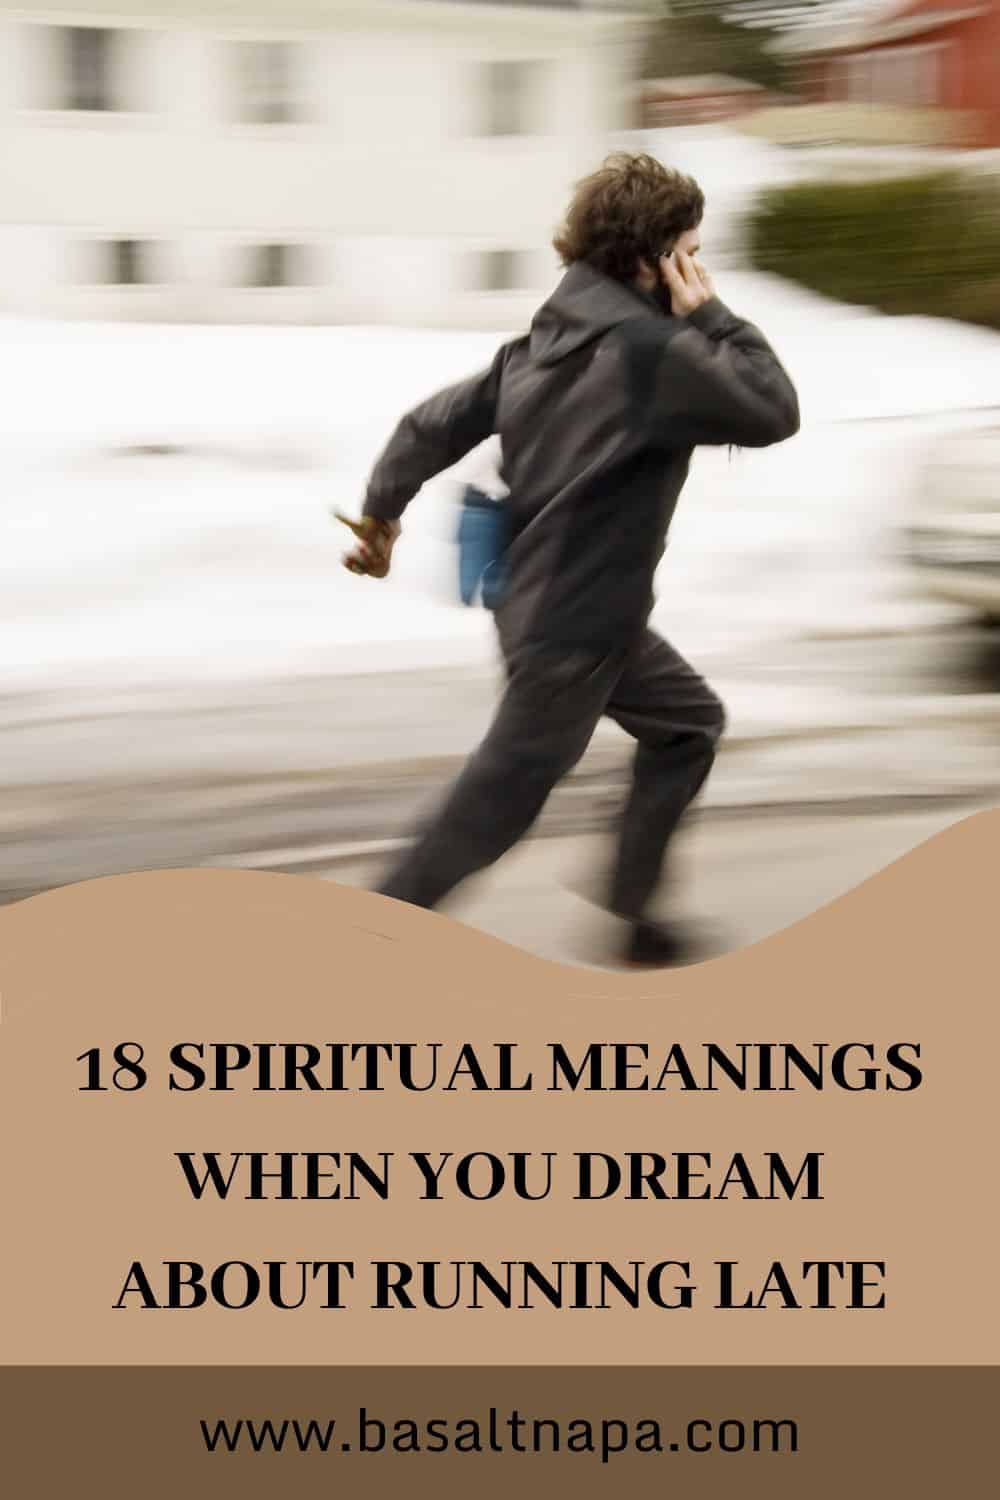 18 Spiritual Meanings When You Dream About Running Late